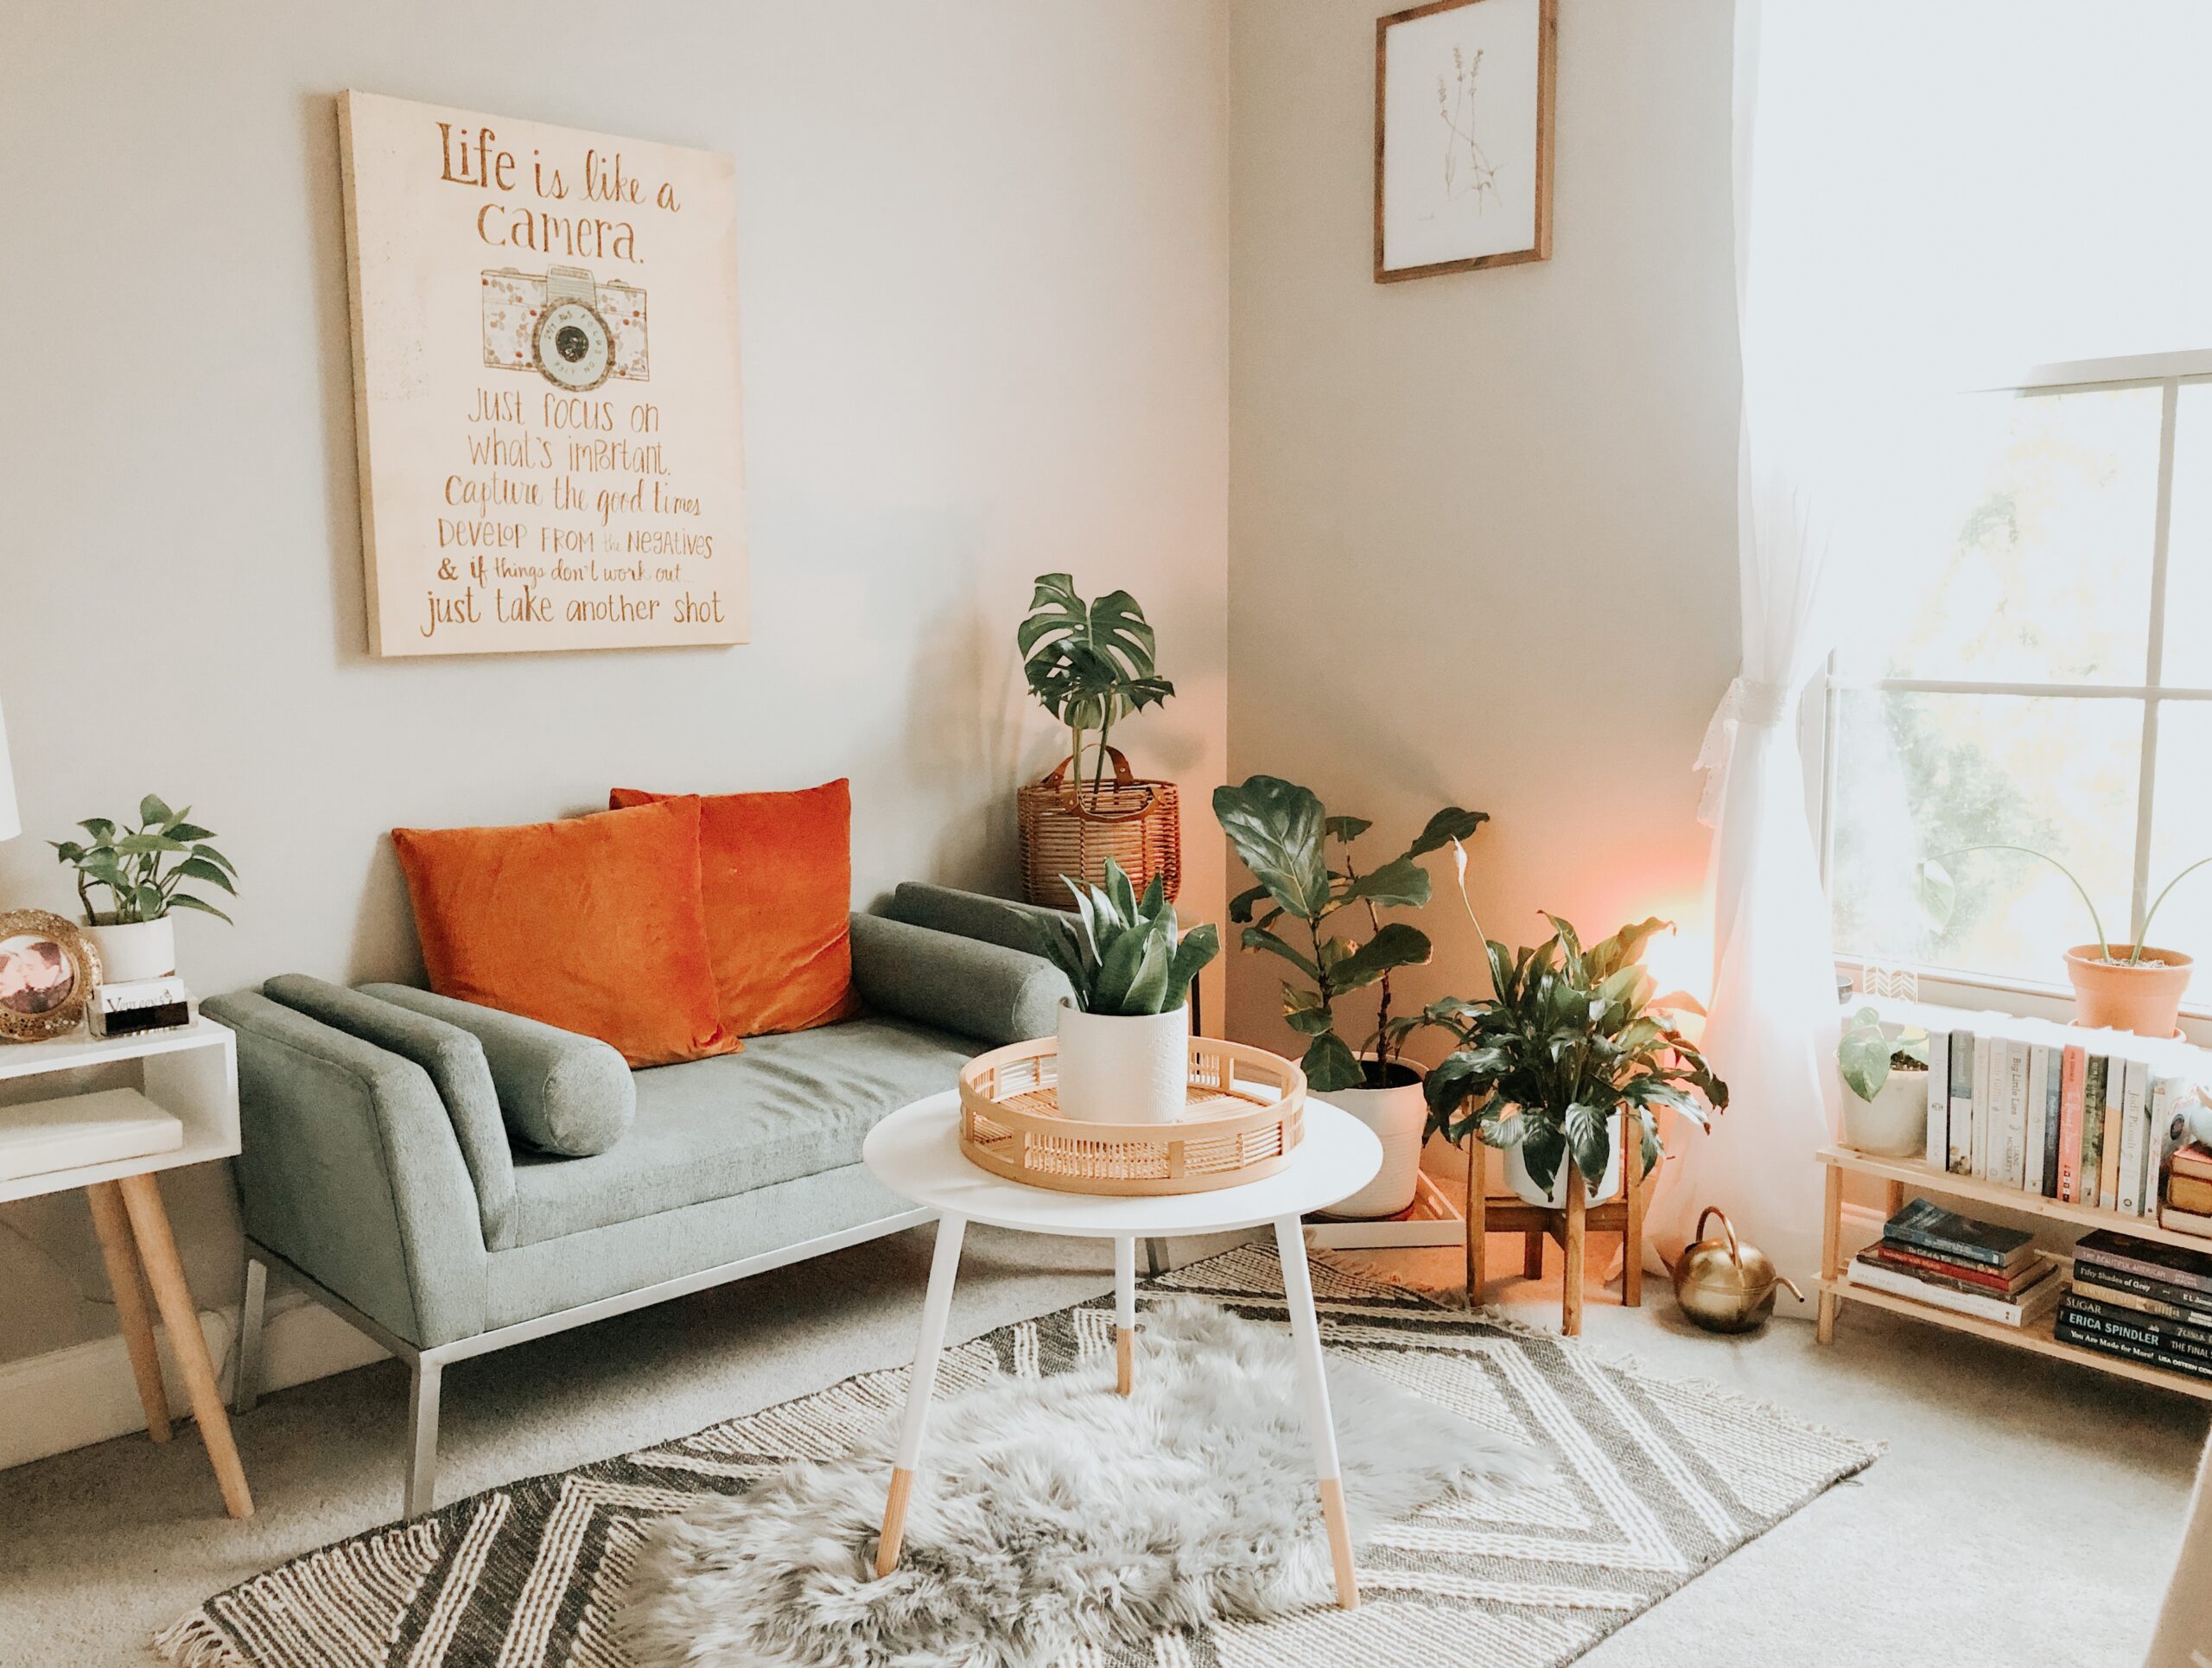 Small living room with many plants and a small green sofa